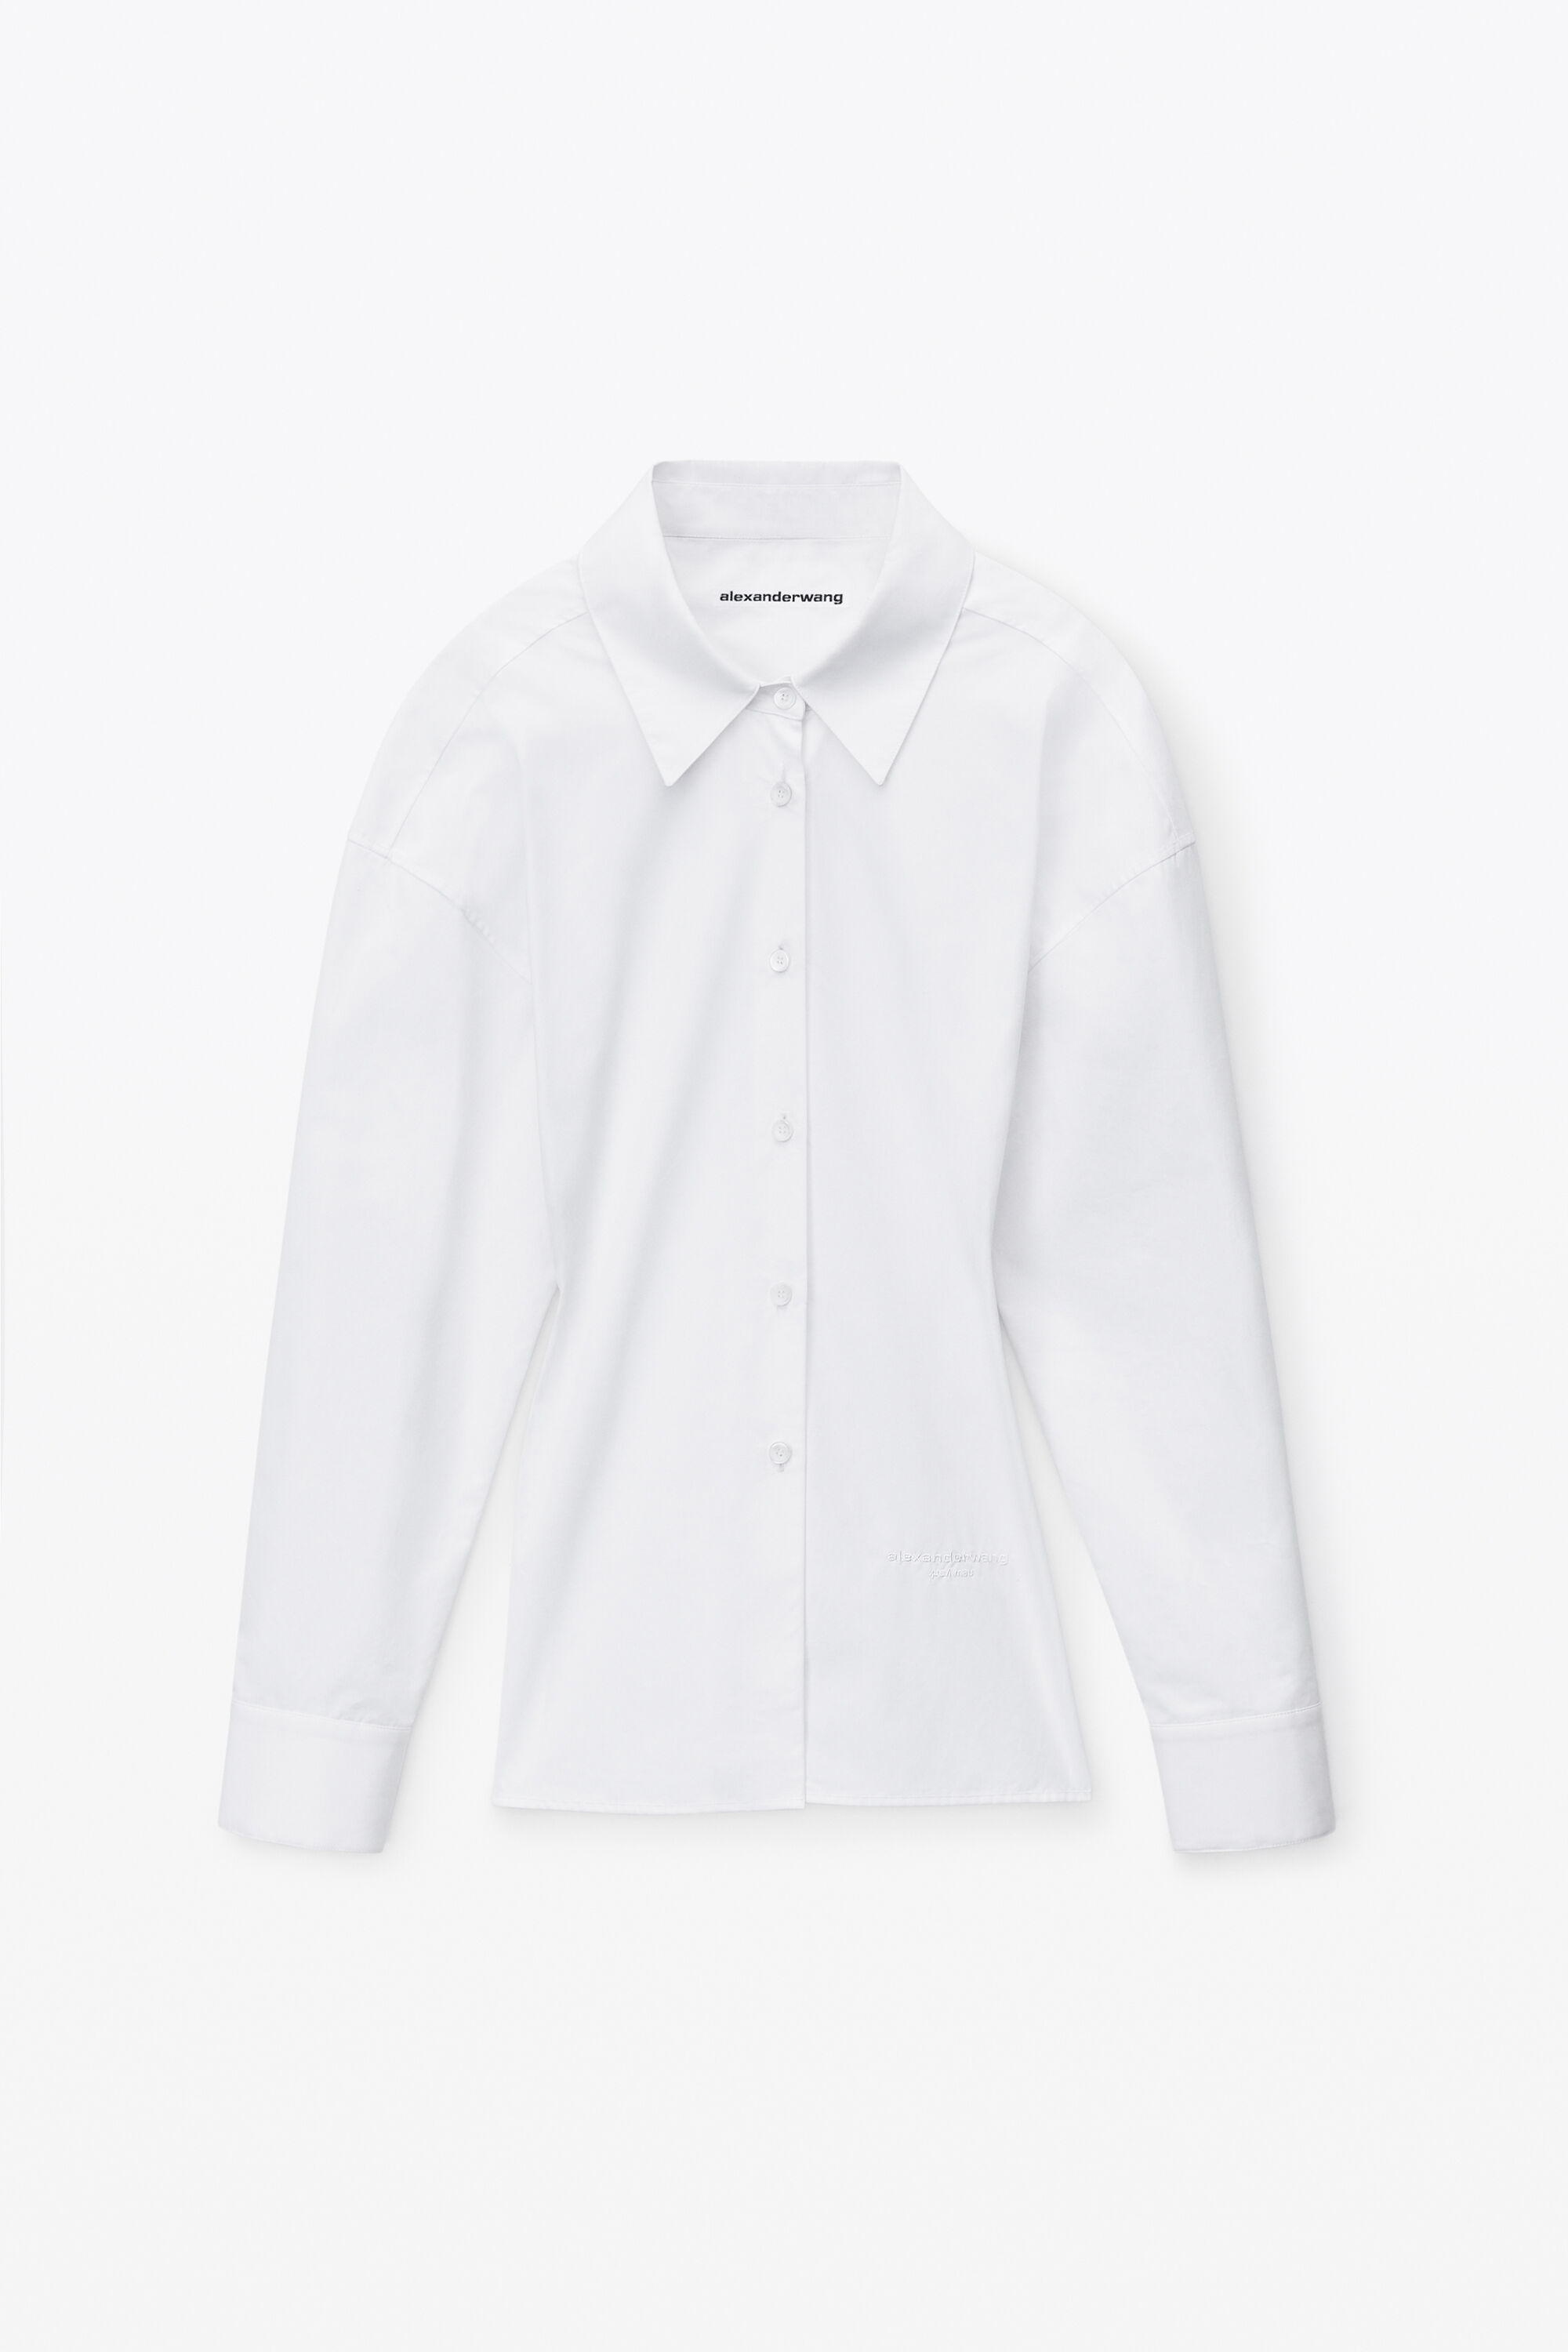 COTTON CINCHED BUTTON UP WITH RIBBED TRIM in WHITE 